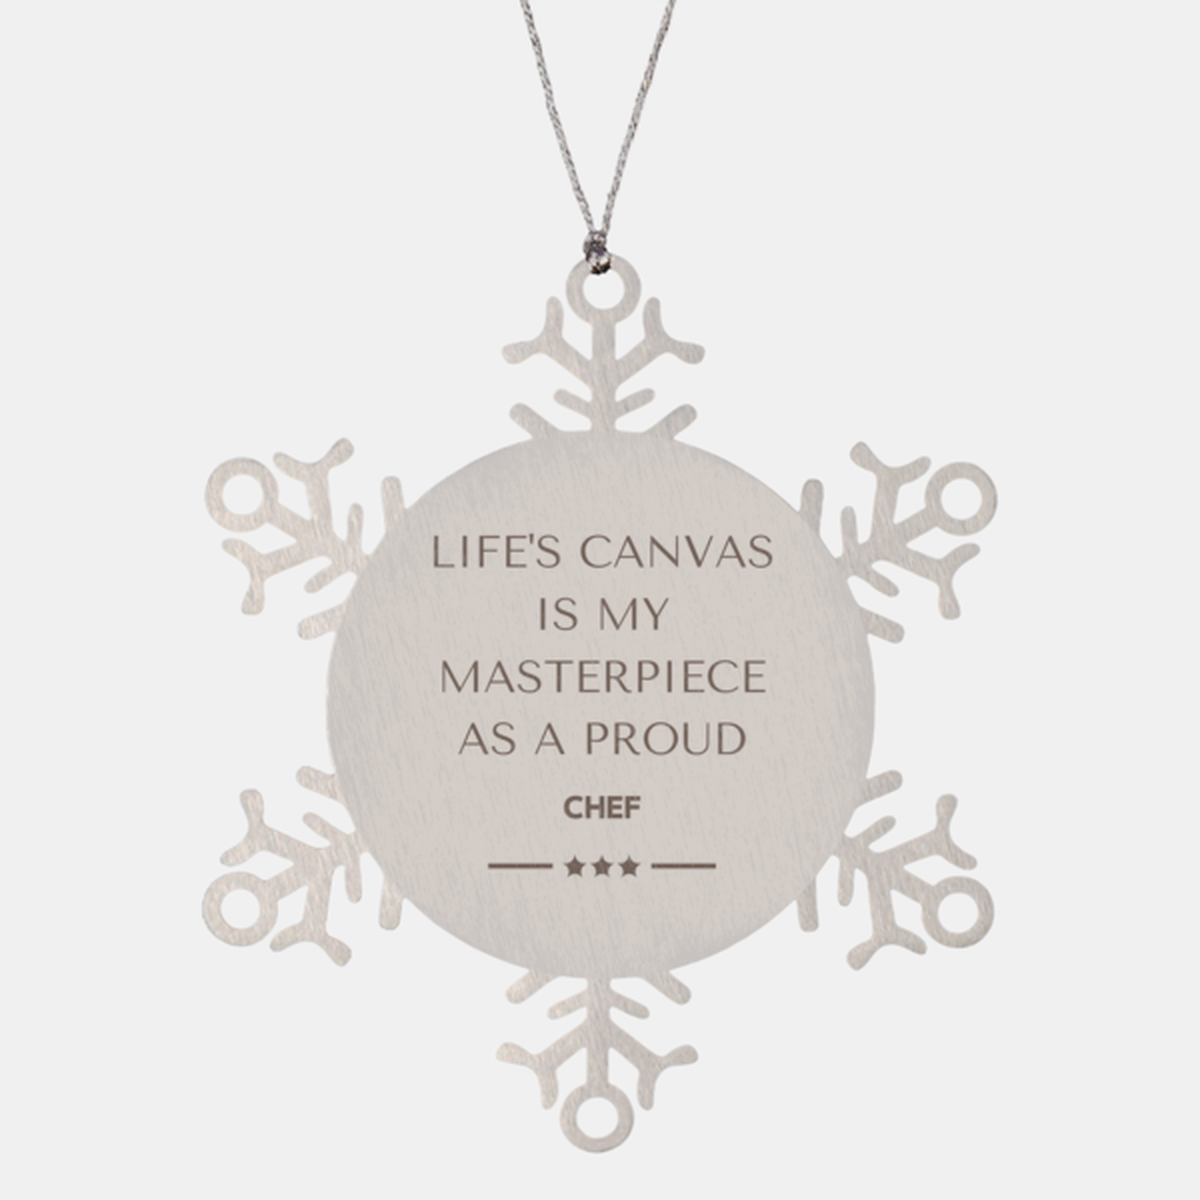 Proud Chef Gifts, Life's canvas is my masterpiece, Epic Birthday Christmas Unique Snowflake Ornament For Chef, Coworkers, Men, Women, Friends